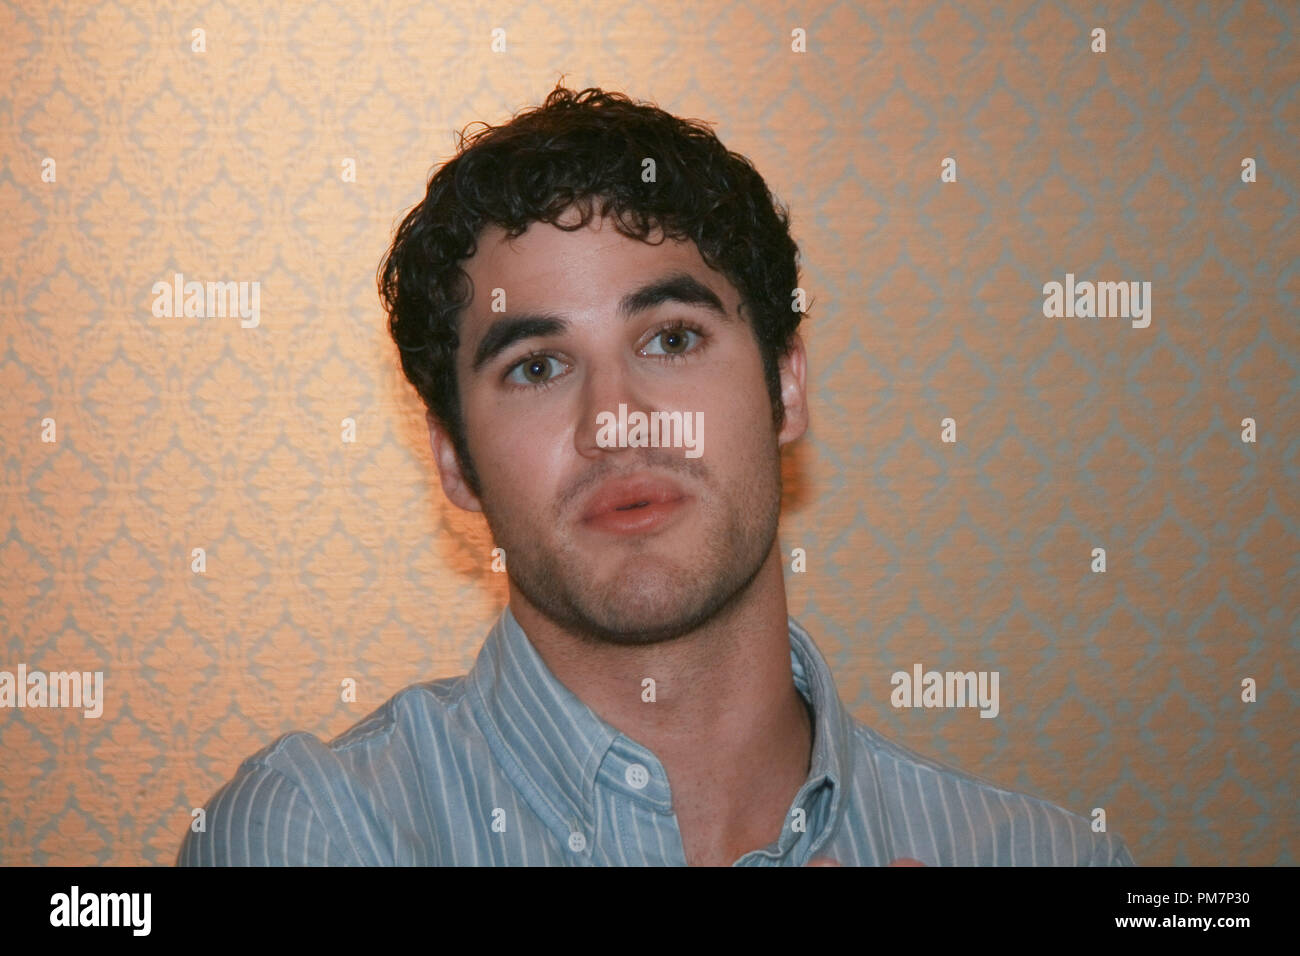 Darren Criss Portrait Session, October 17, 2011.  Reproduction by American tabloids is absolutely forbidden. File Reference # 31208 002JRC  For Editorial Use Only -  All Rights Reserved Stock Photo